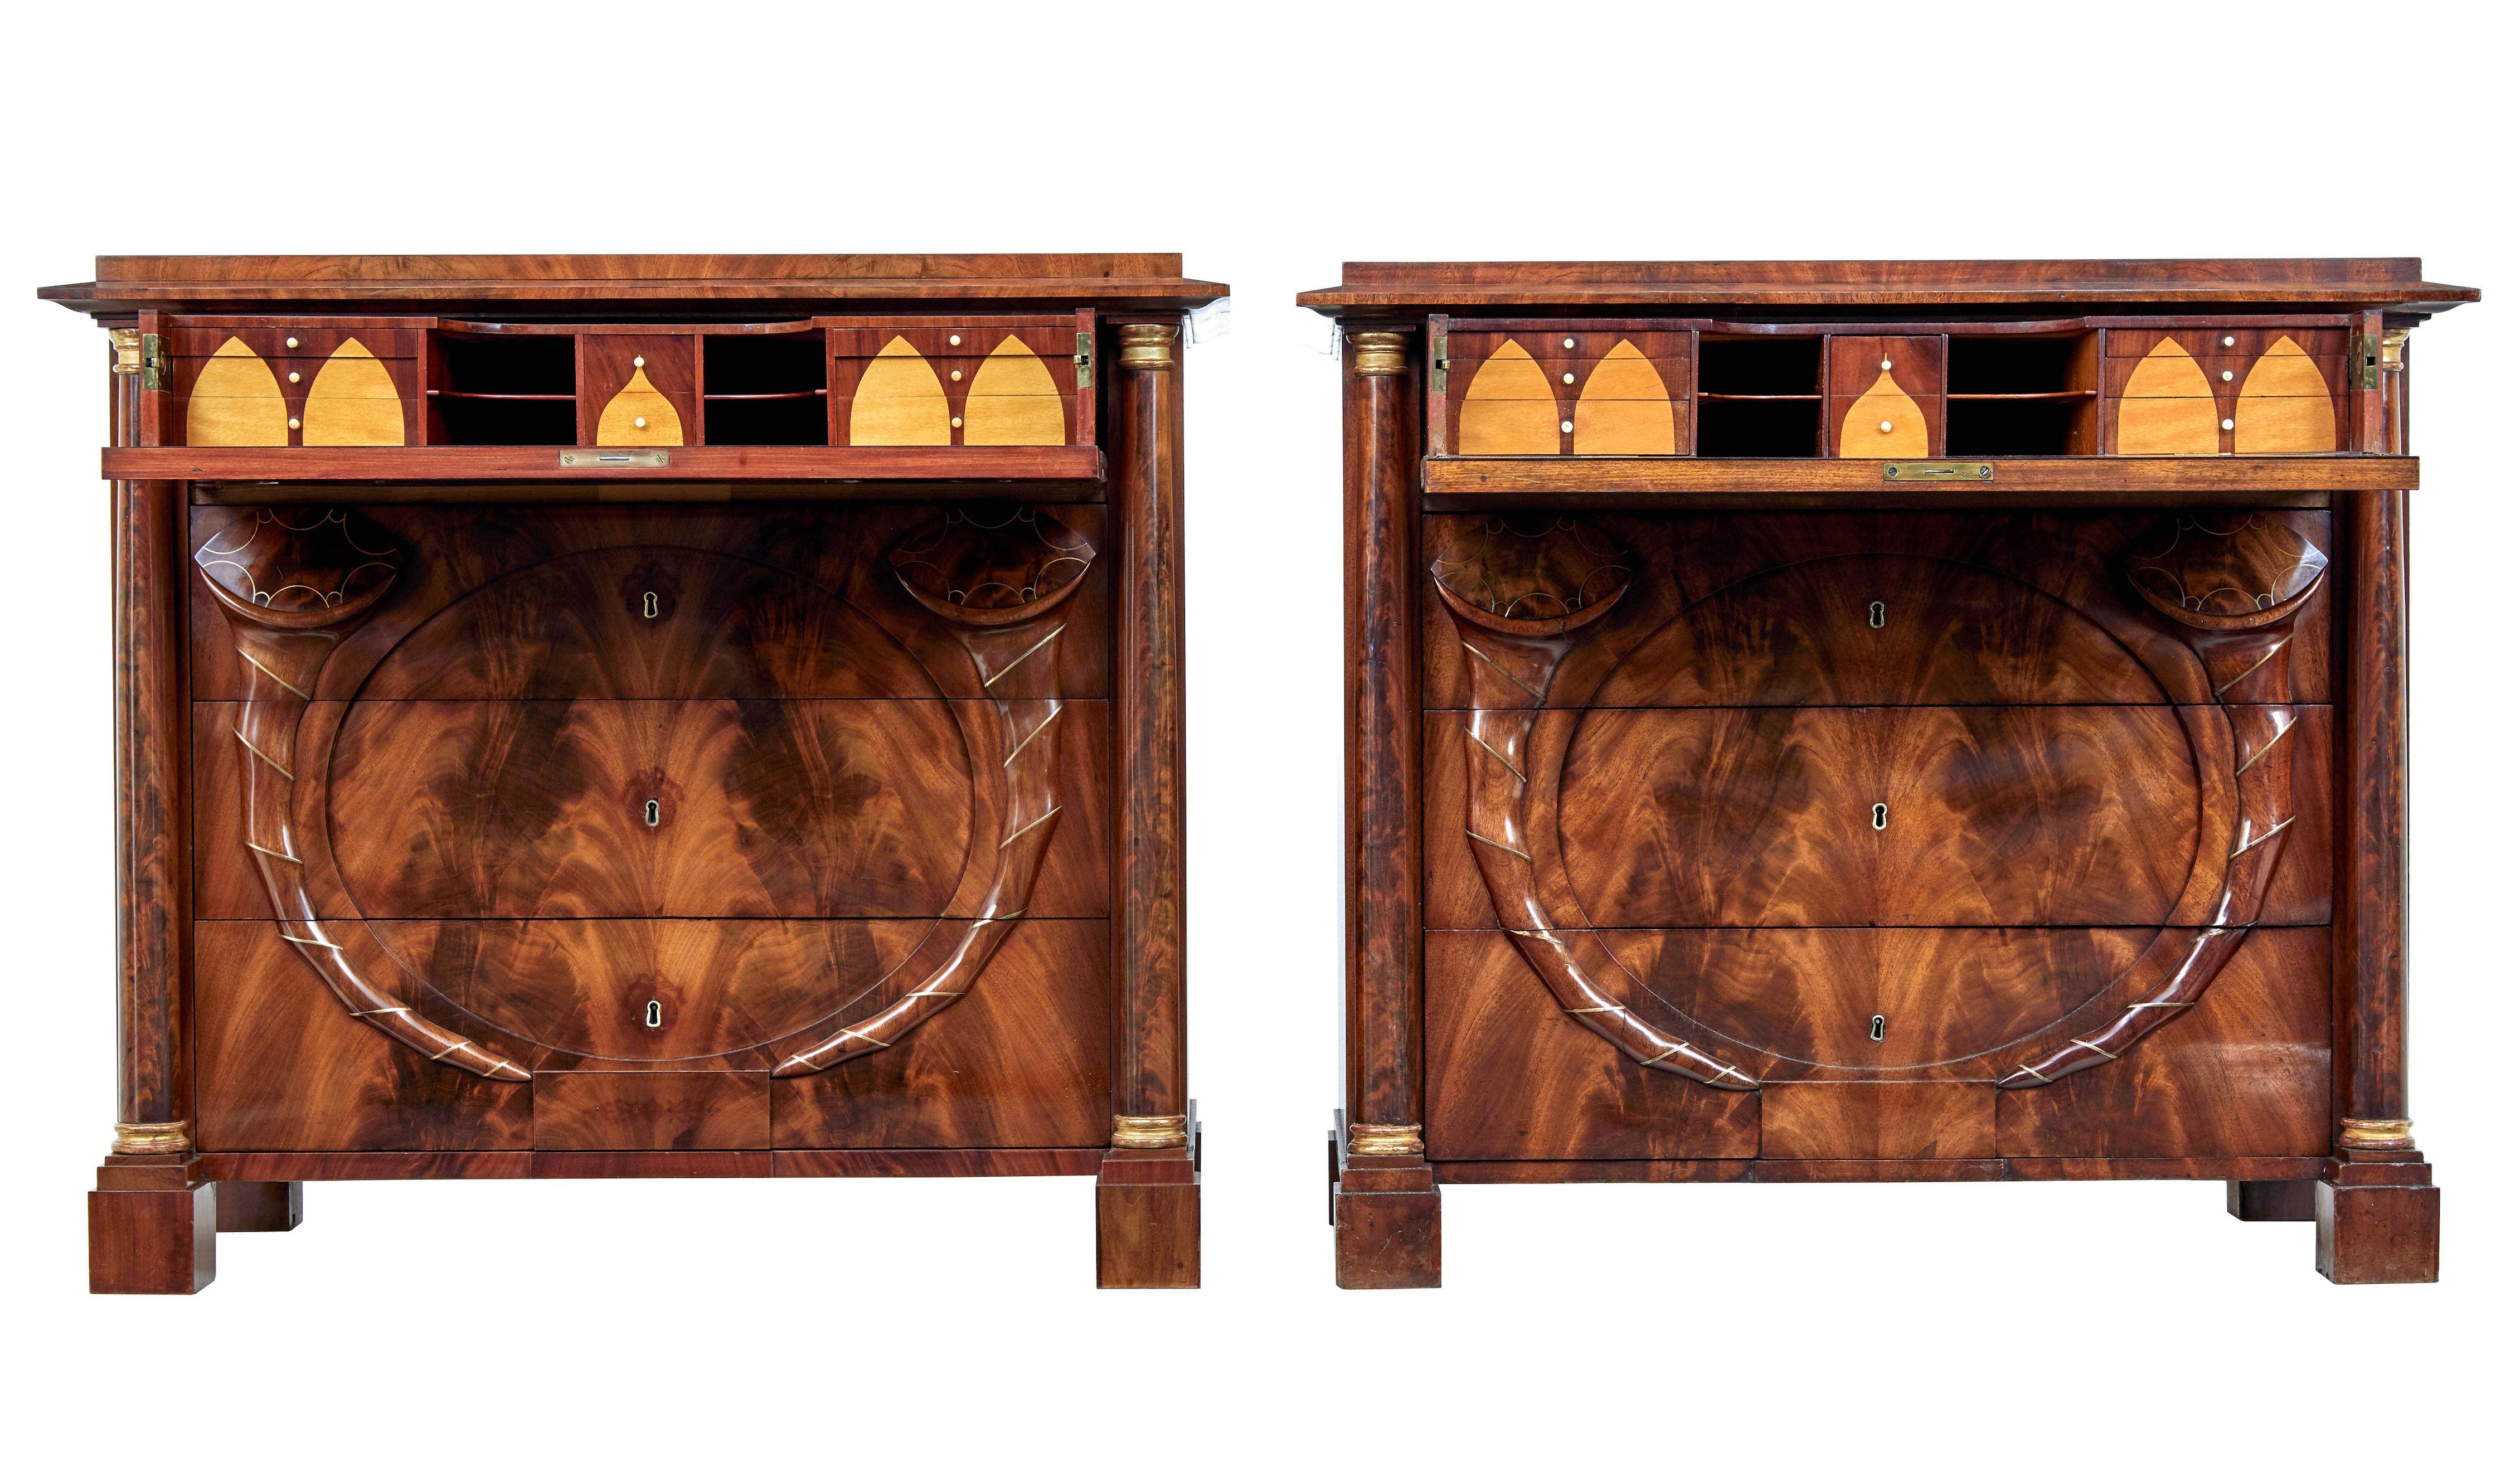 Pair of early 19th century mahogany Biedermeier secretaire commodes circa 1830.

Rare pair of Biedermeier period Swedish chest of drawers.  4 drawers, each top drawer with a fully fitted interior of satinwood and mahogany drawers and pigeon holes. 